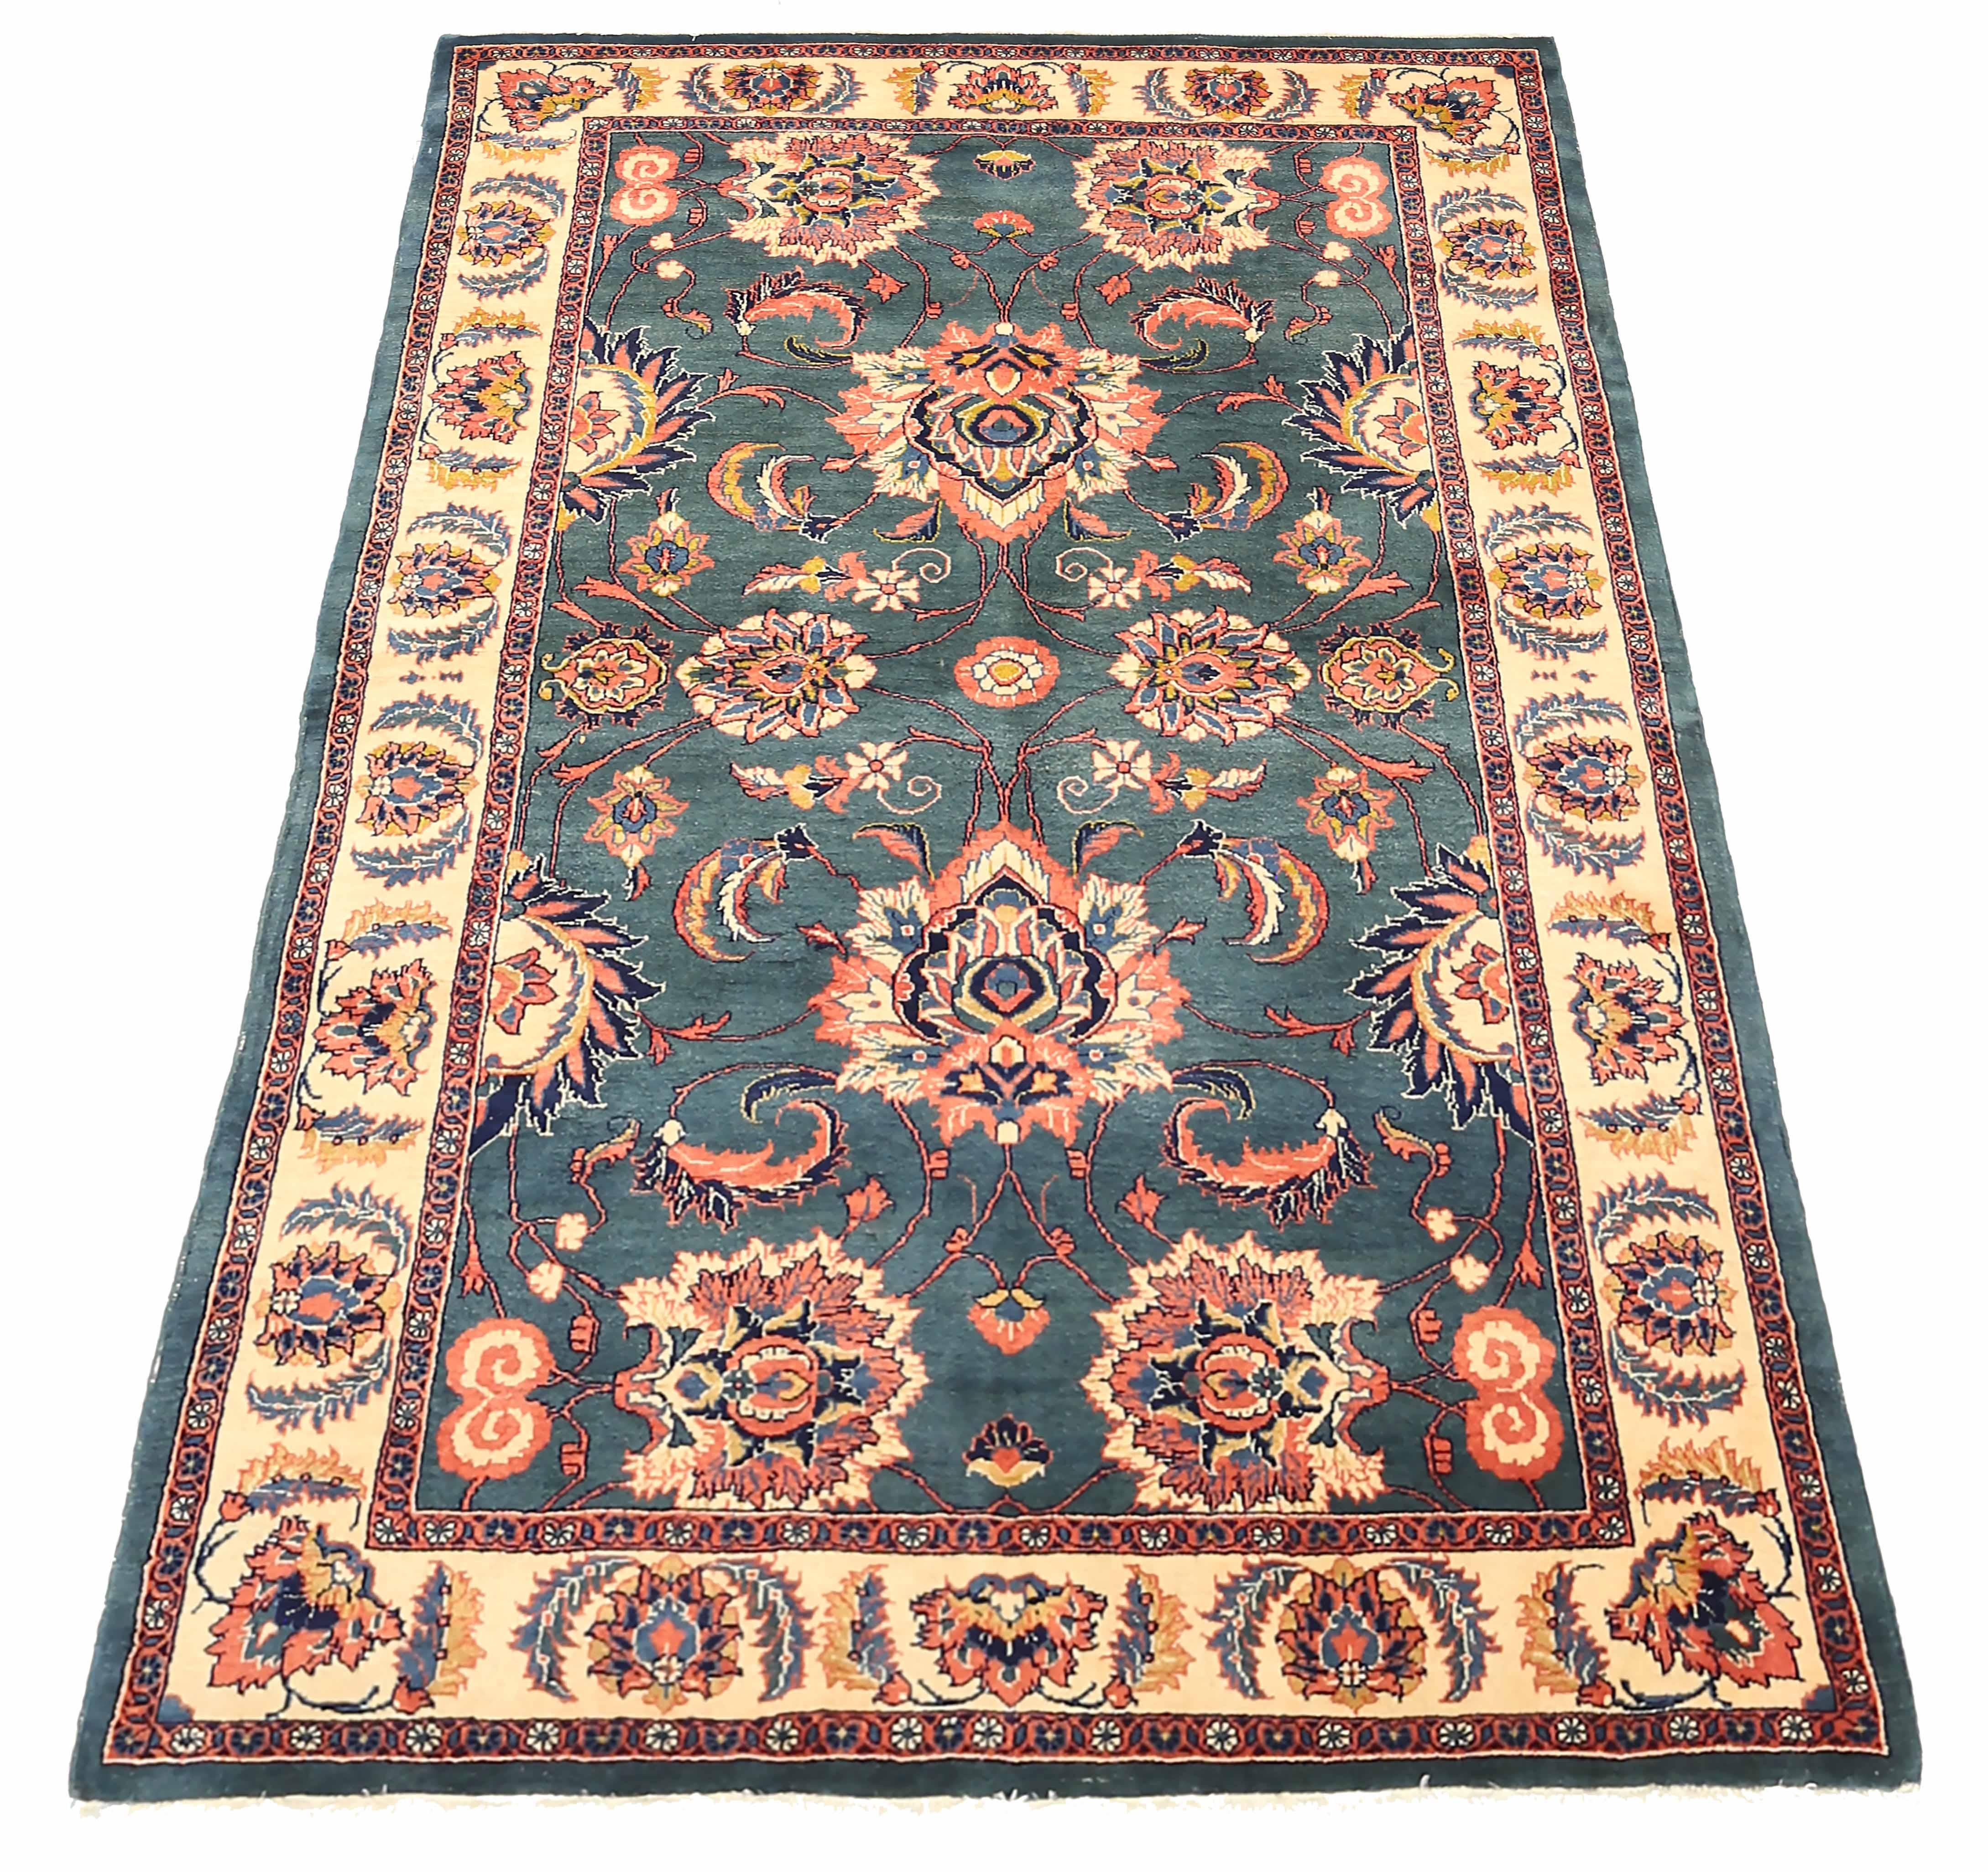 Vintage Persian Area Rug - Handwoven with Finest Sheep's Wool and Natural Vegetable Dyes
Add an element of timeless elegance to your home with this vintage Persian area rug. Expert artisans have handwoven each piece using only the finest sheep's